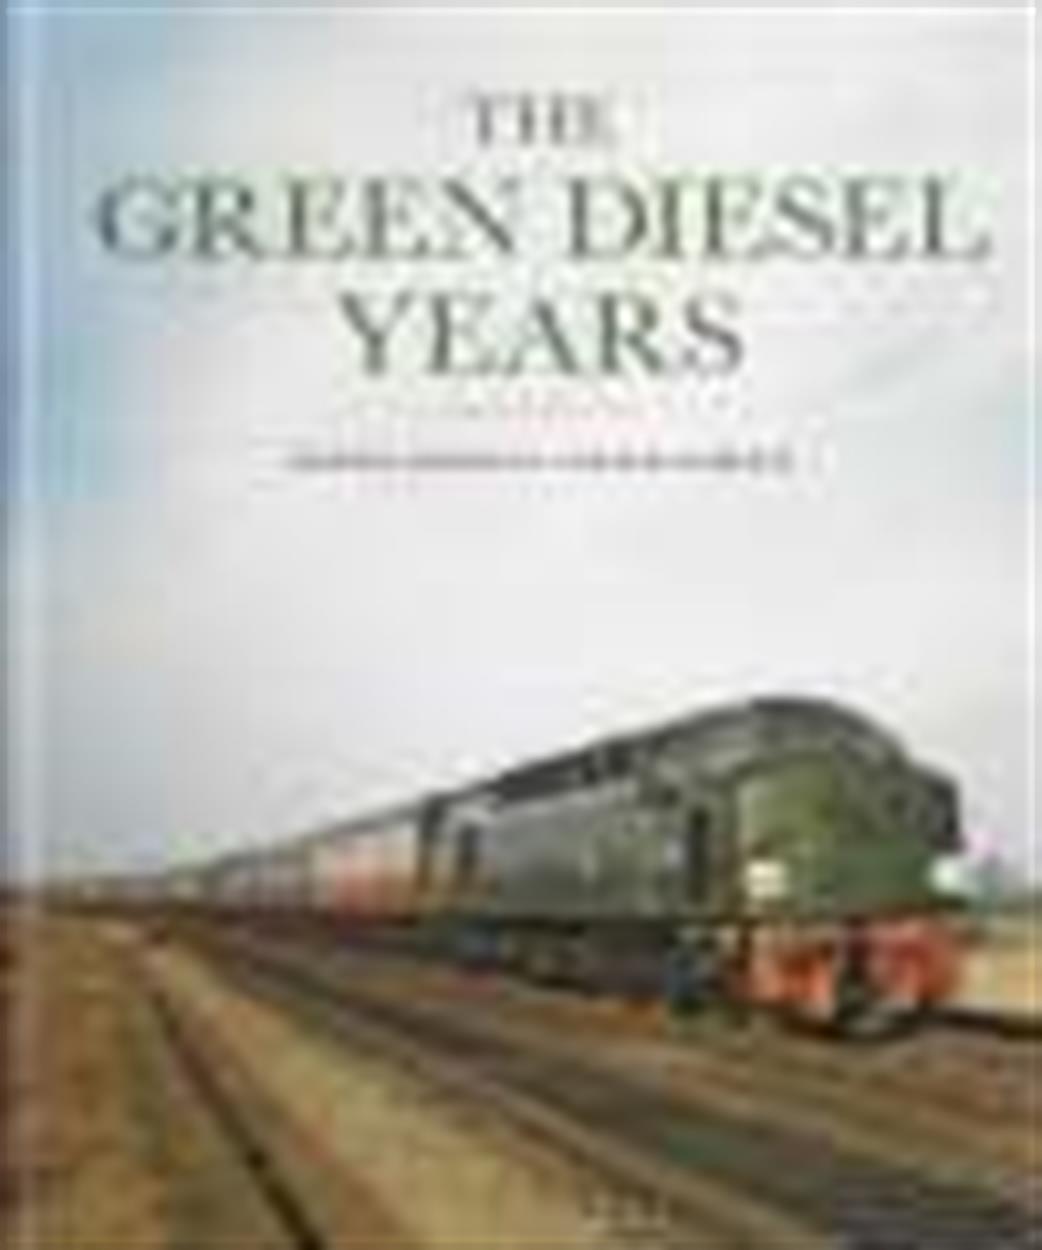 Ian Allan Publishing  9780711038318 The Green Diesel Years by Martin Jenkins & Charles Roberts